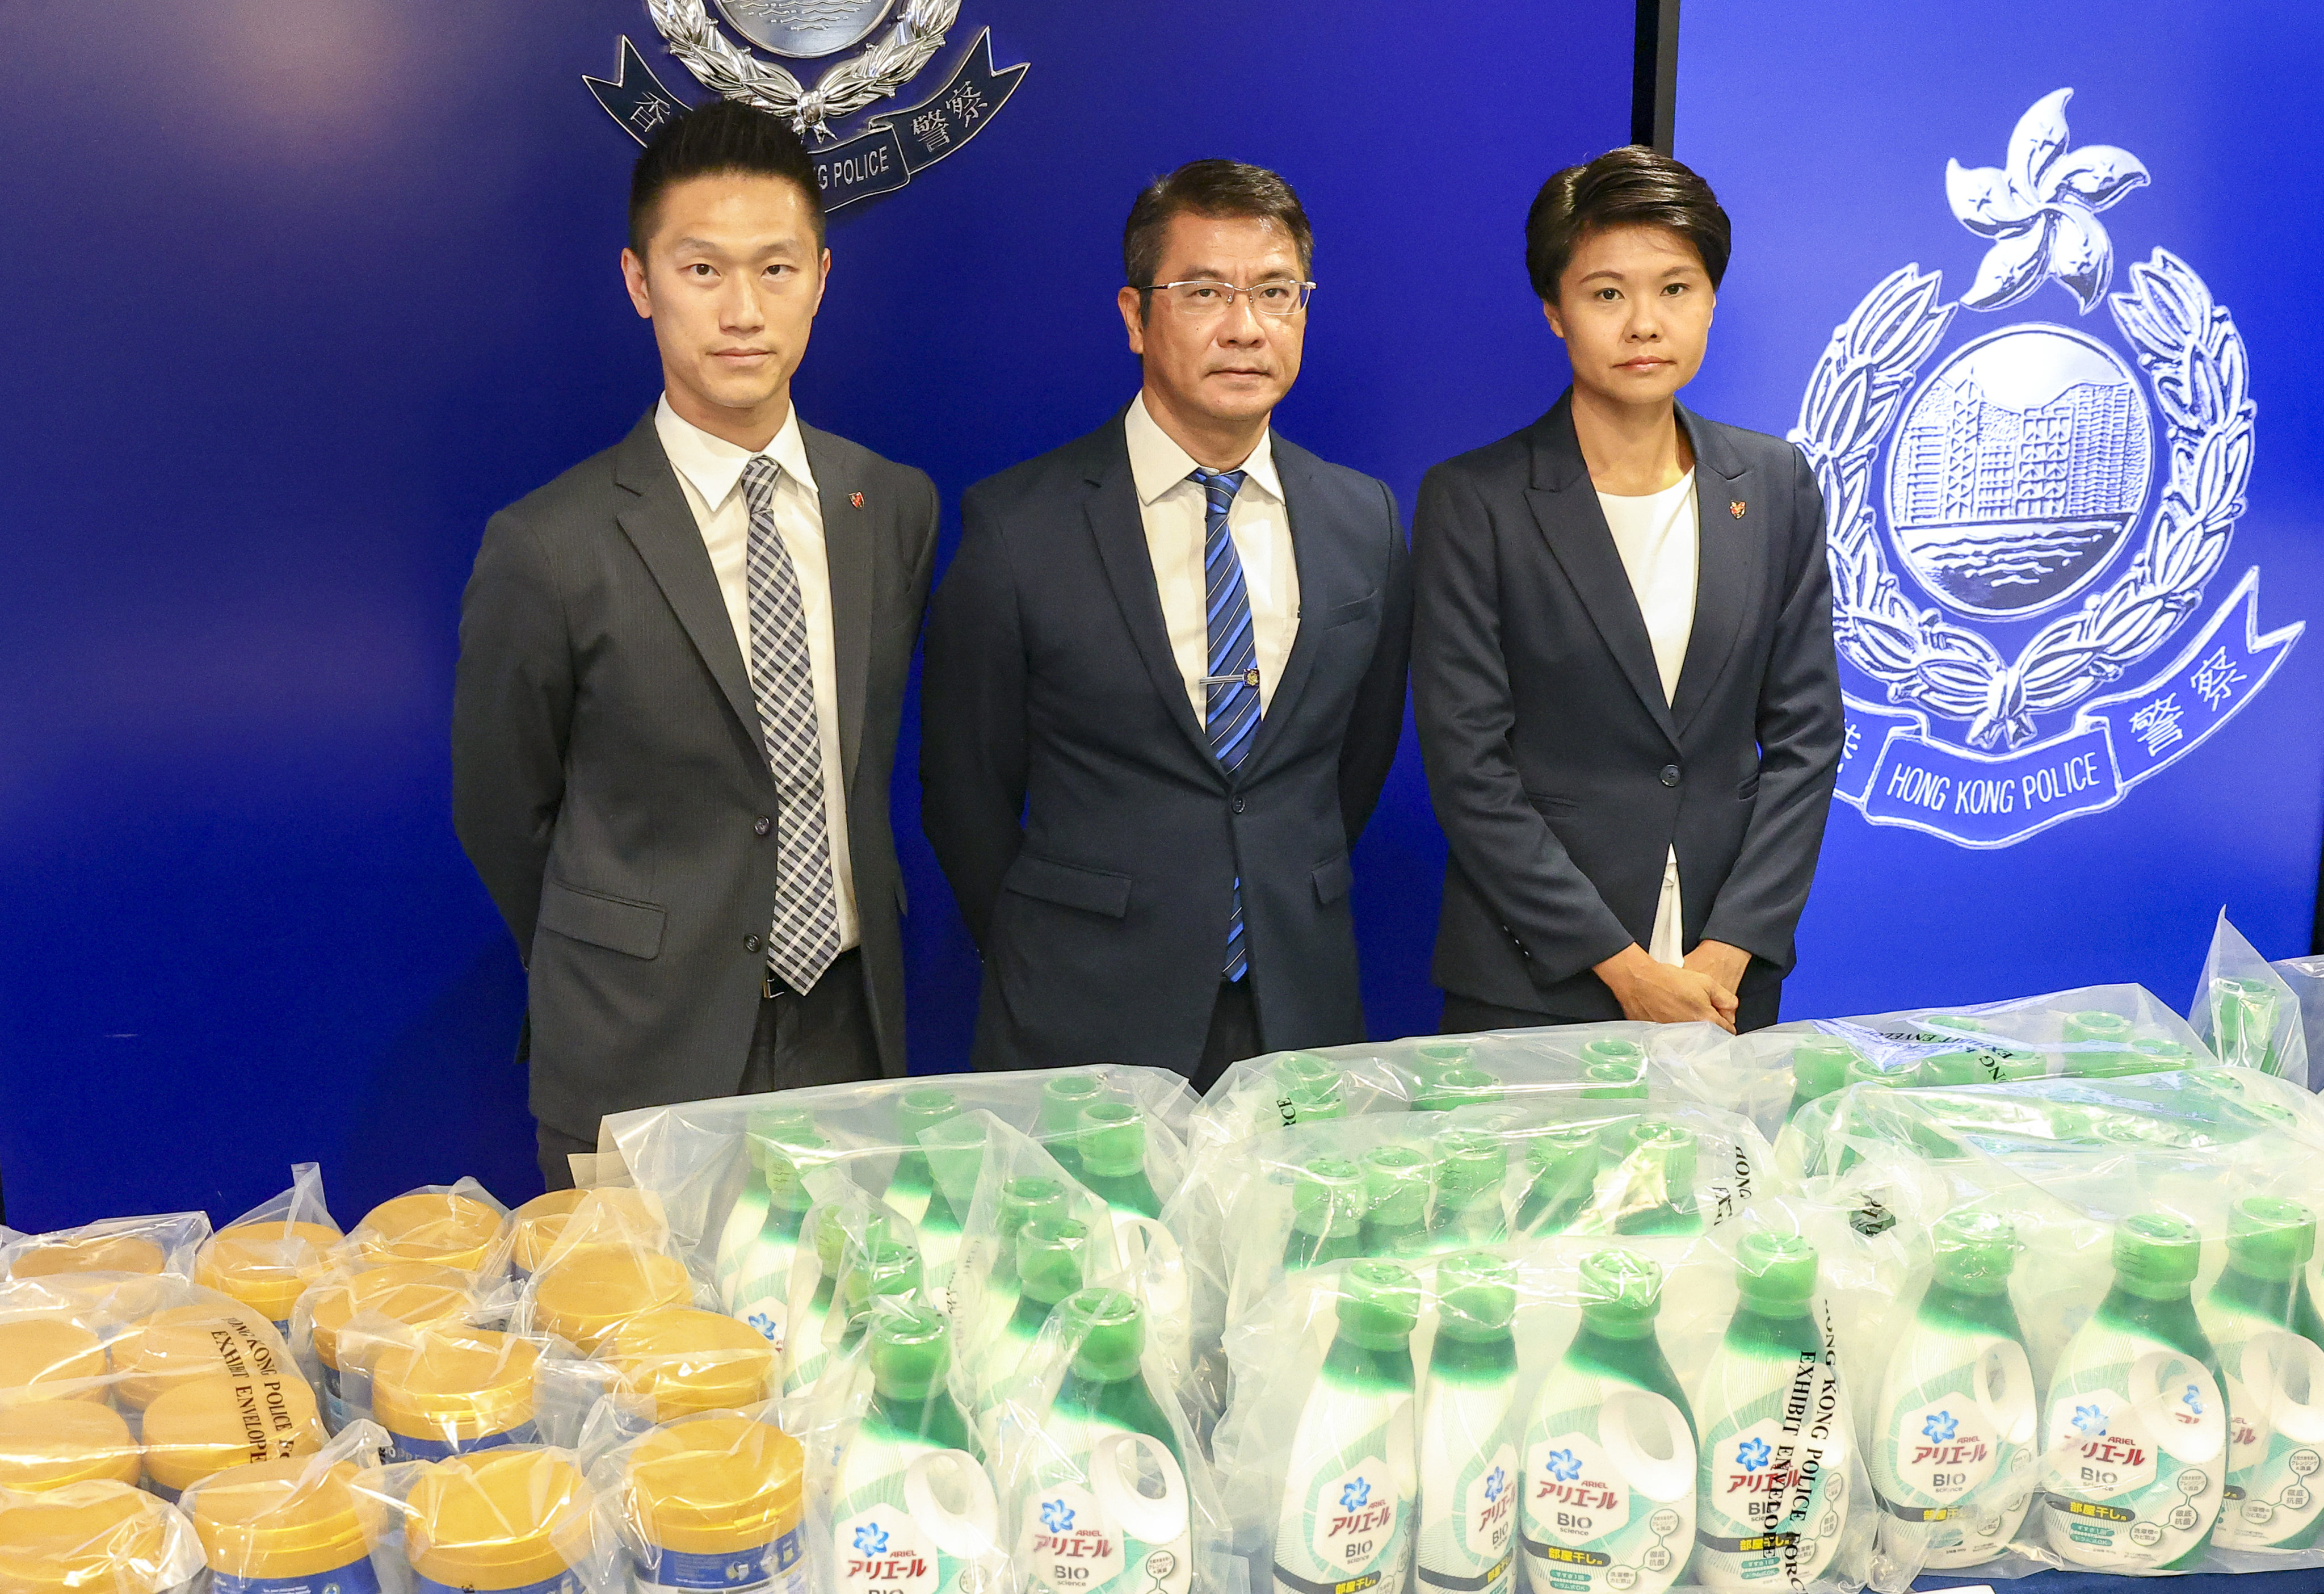 Chief Inspector Or Wing-yan (left), Superintendent Rick Chan and Senior Inspector Mak Wai-kwong display goods seized during the operation. Photo: Dickson Lee